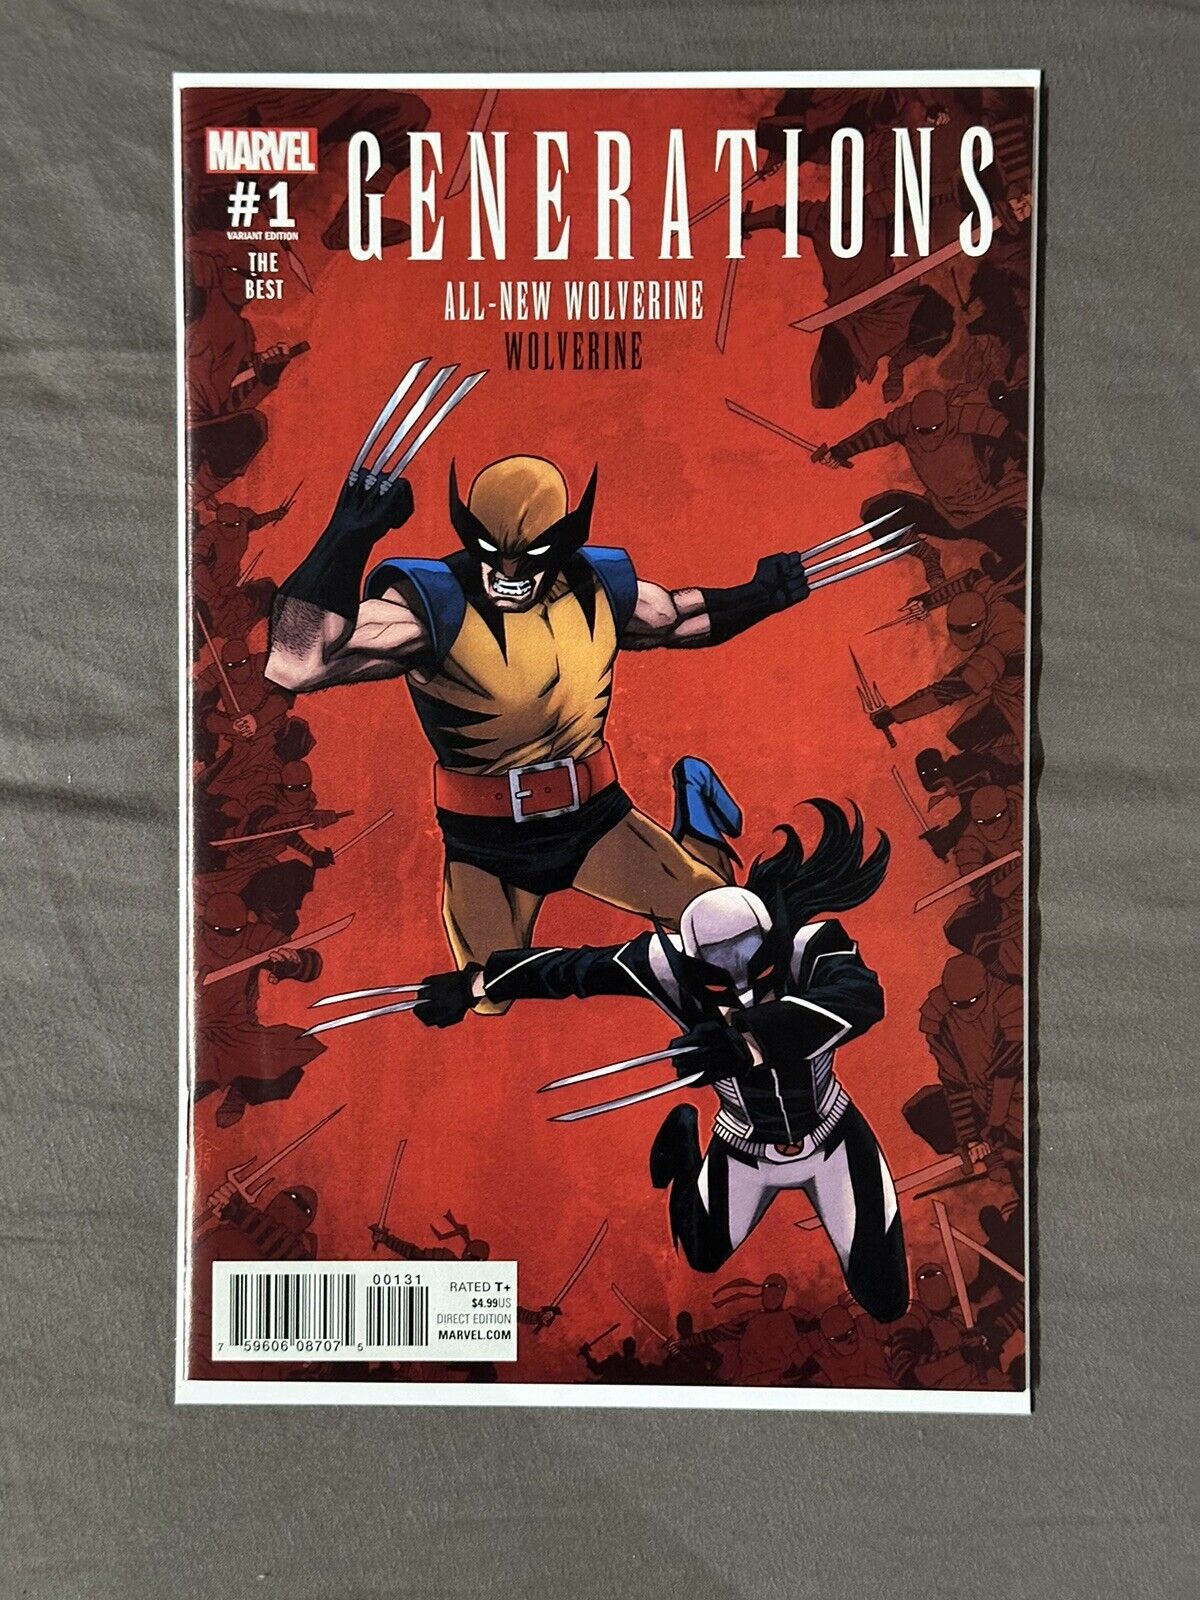 Generations: Wolverine & All-New Wolverine  #1 - Oct 2017 - Incentive